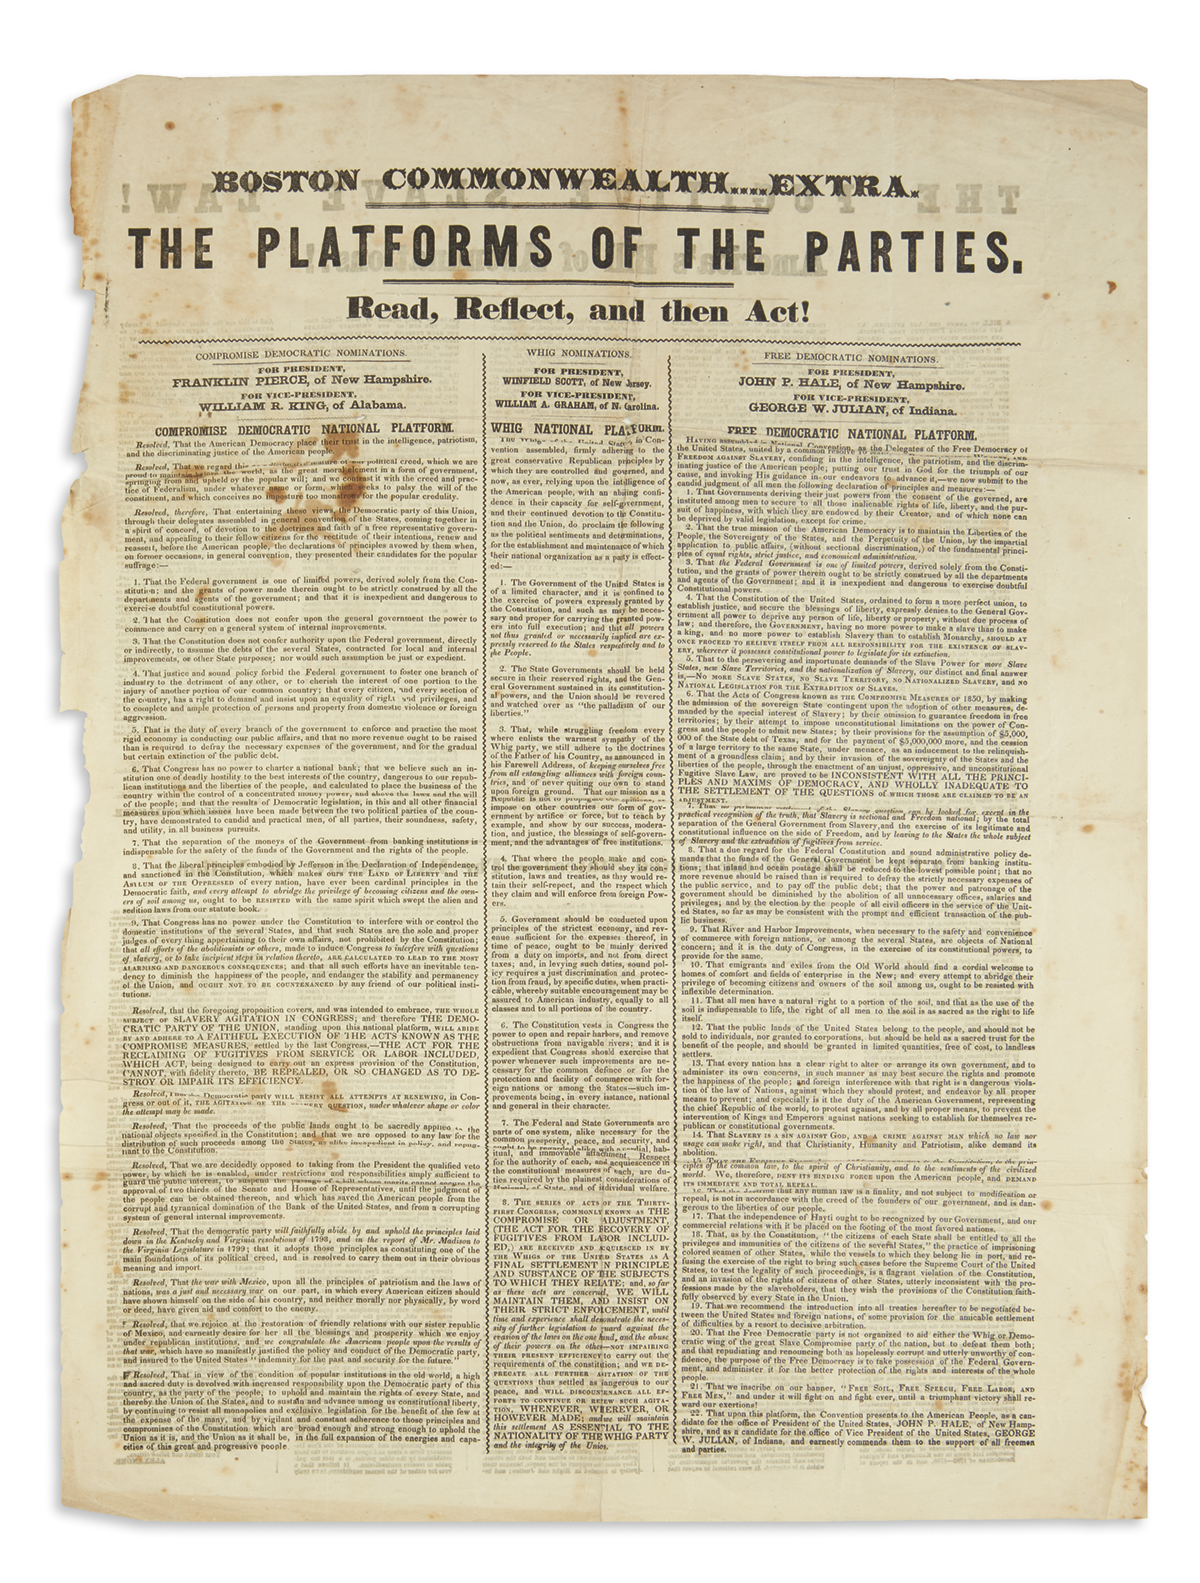 (PRESIDENTS--1852 CAMPAIGN.) Boston Commonwealth Extra--The Platforms of the Parties. Read, Reflect, and then Act!